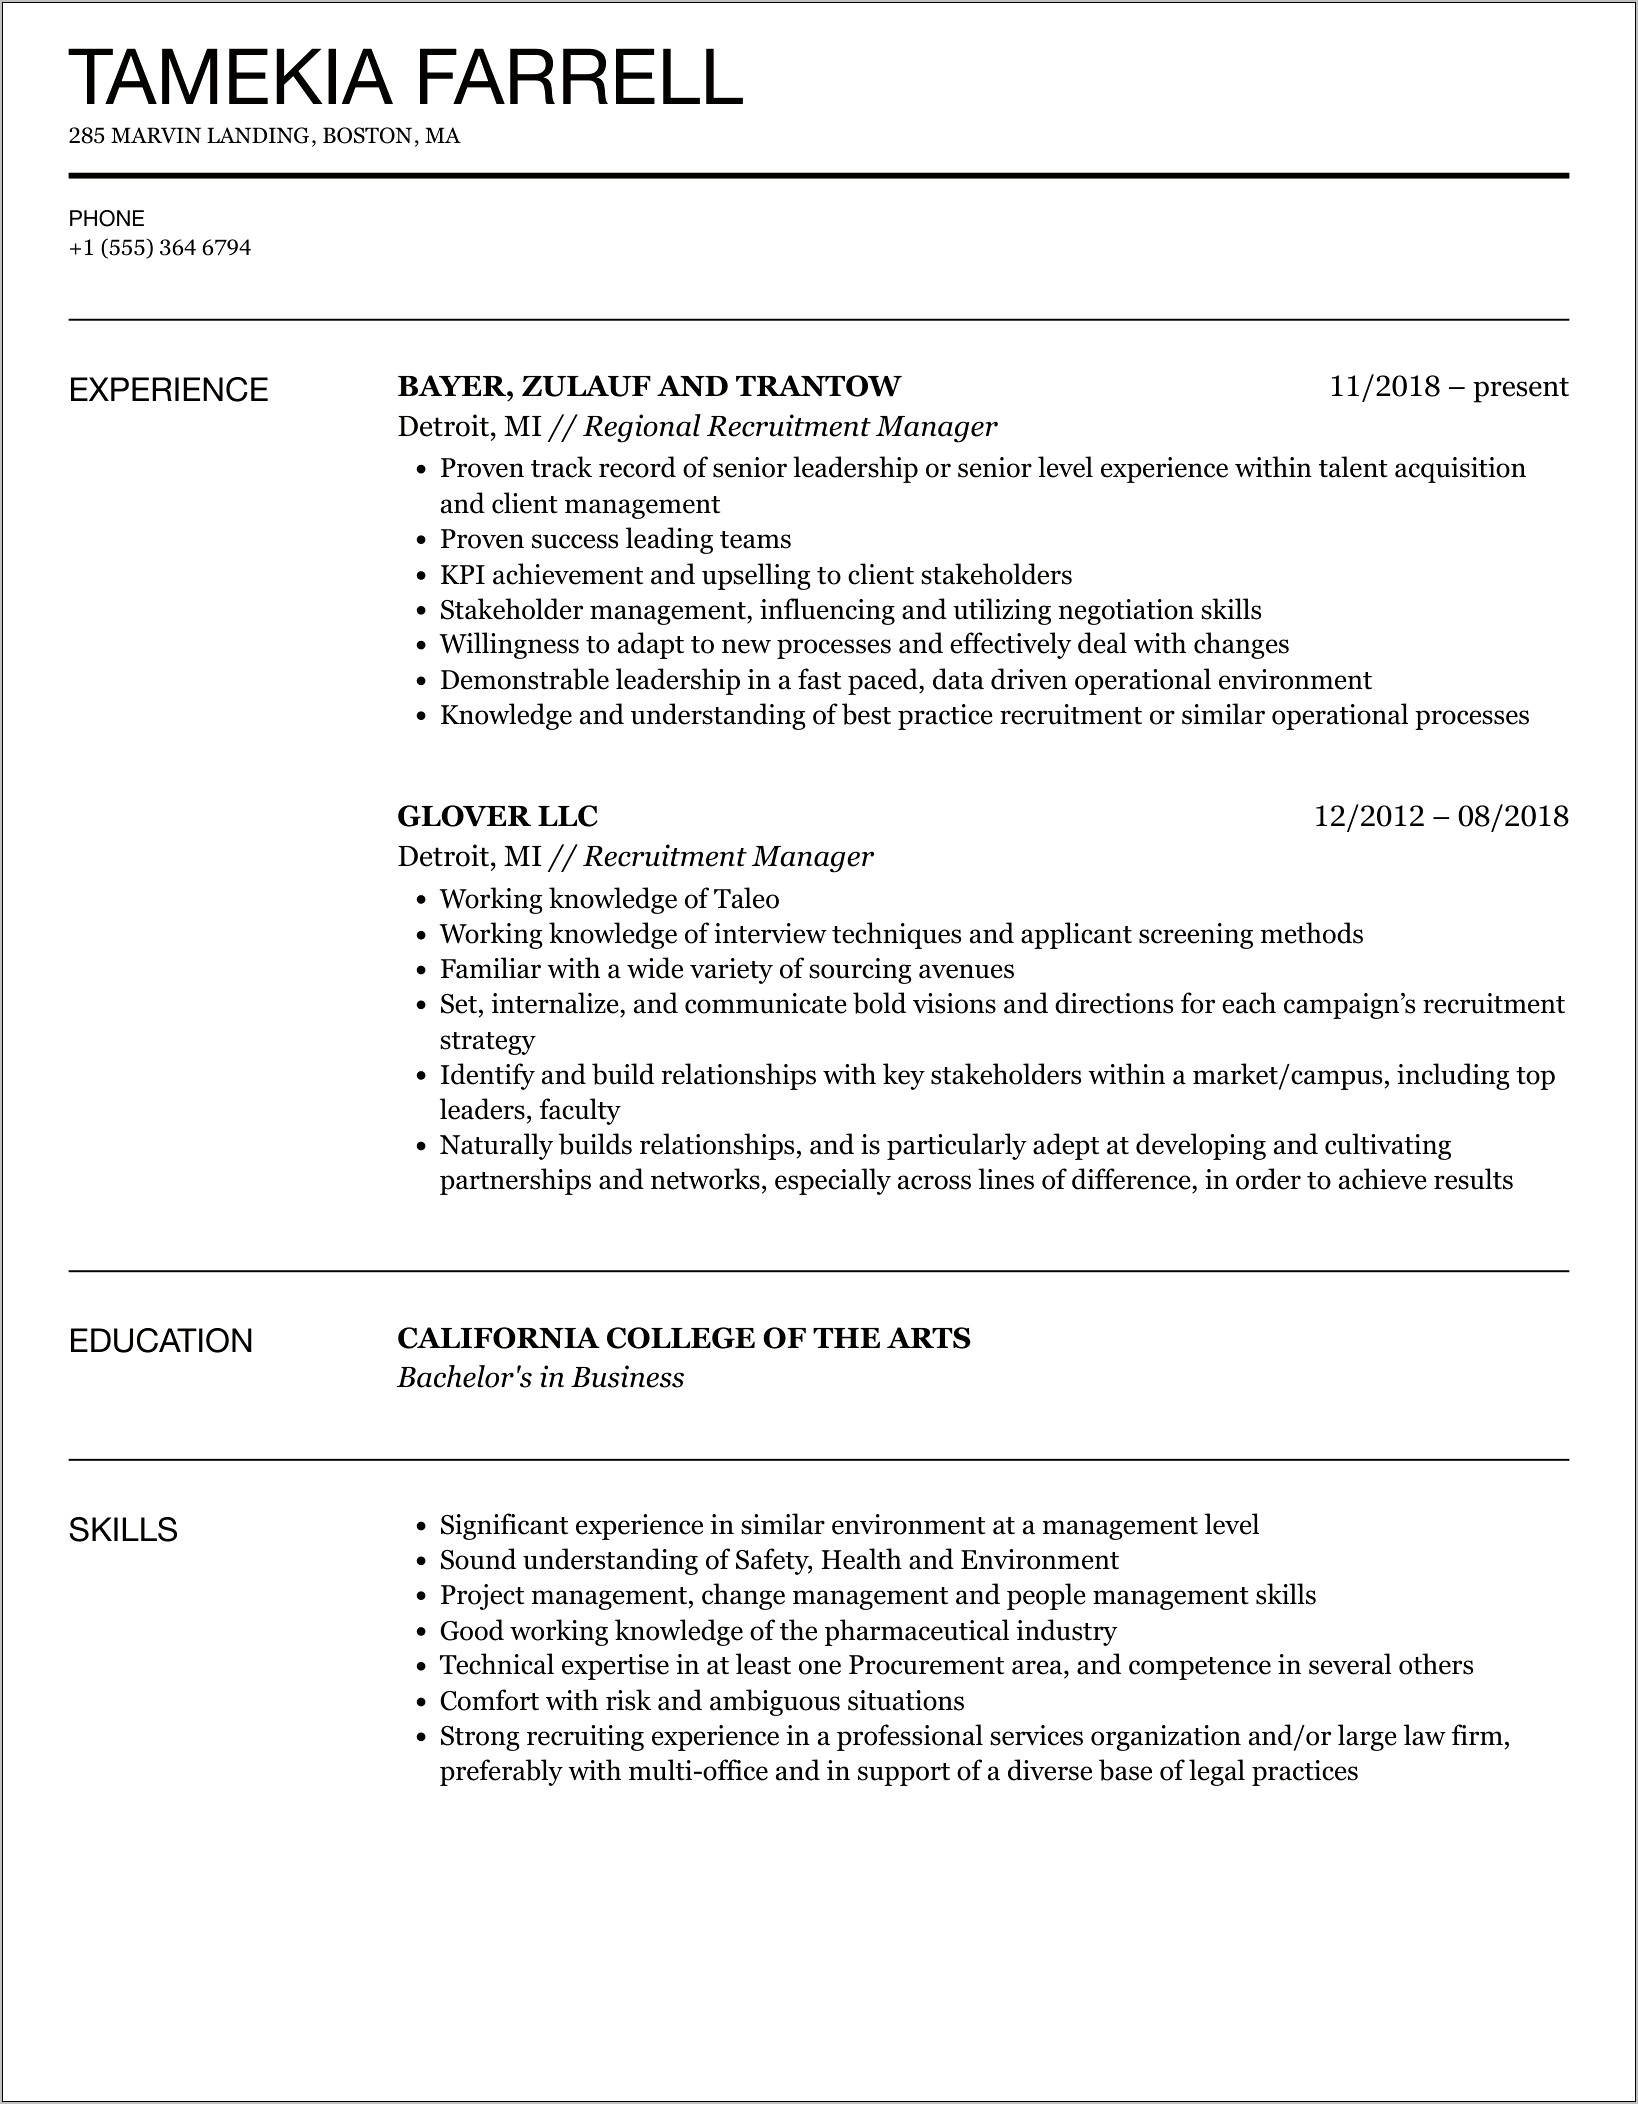 Assistant Manager Resume Job Hero